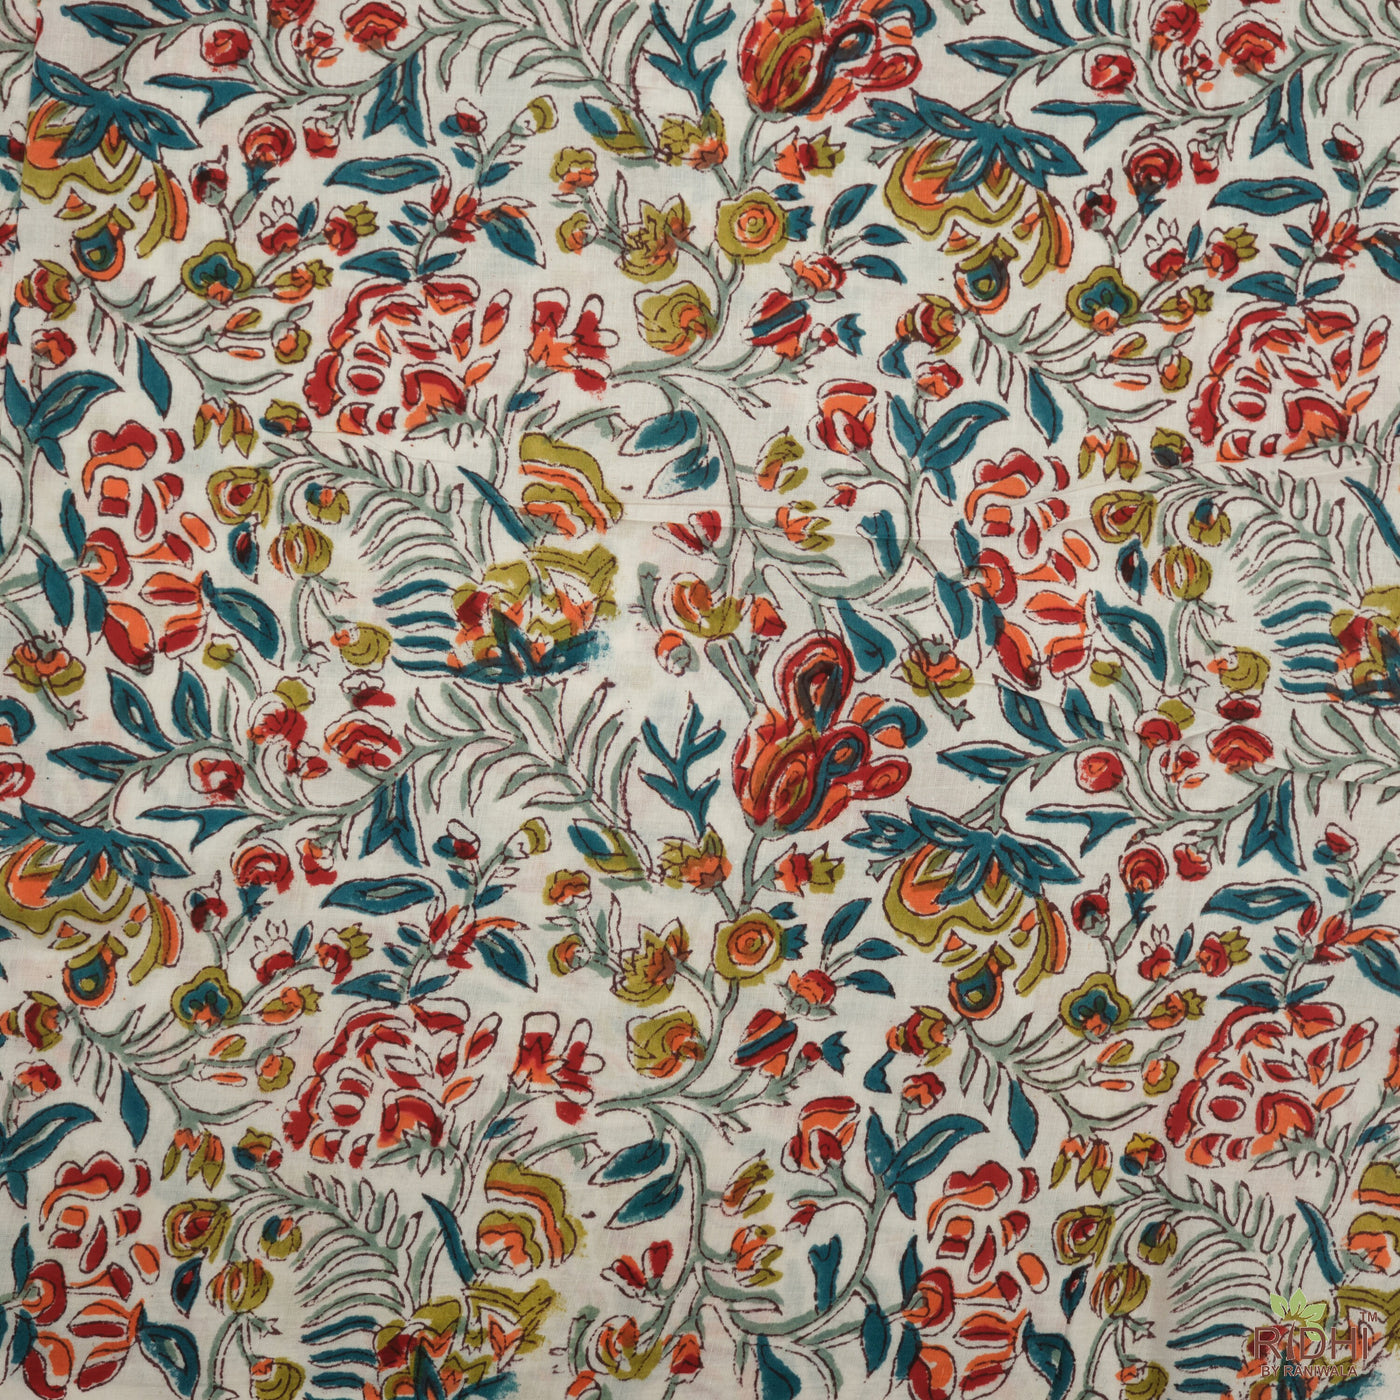 Fabricrush Sangria Red, Ginger Orange, Pine Green Indian Floral Hand Block Printed 100% Pure Cotton Cloth, Fabric by the yard, Curtains Pillows Cushion